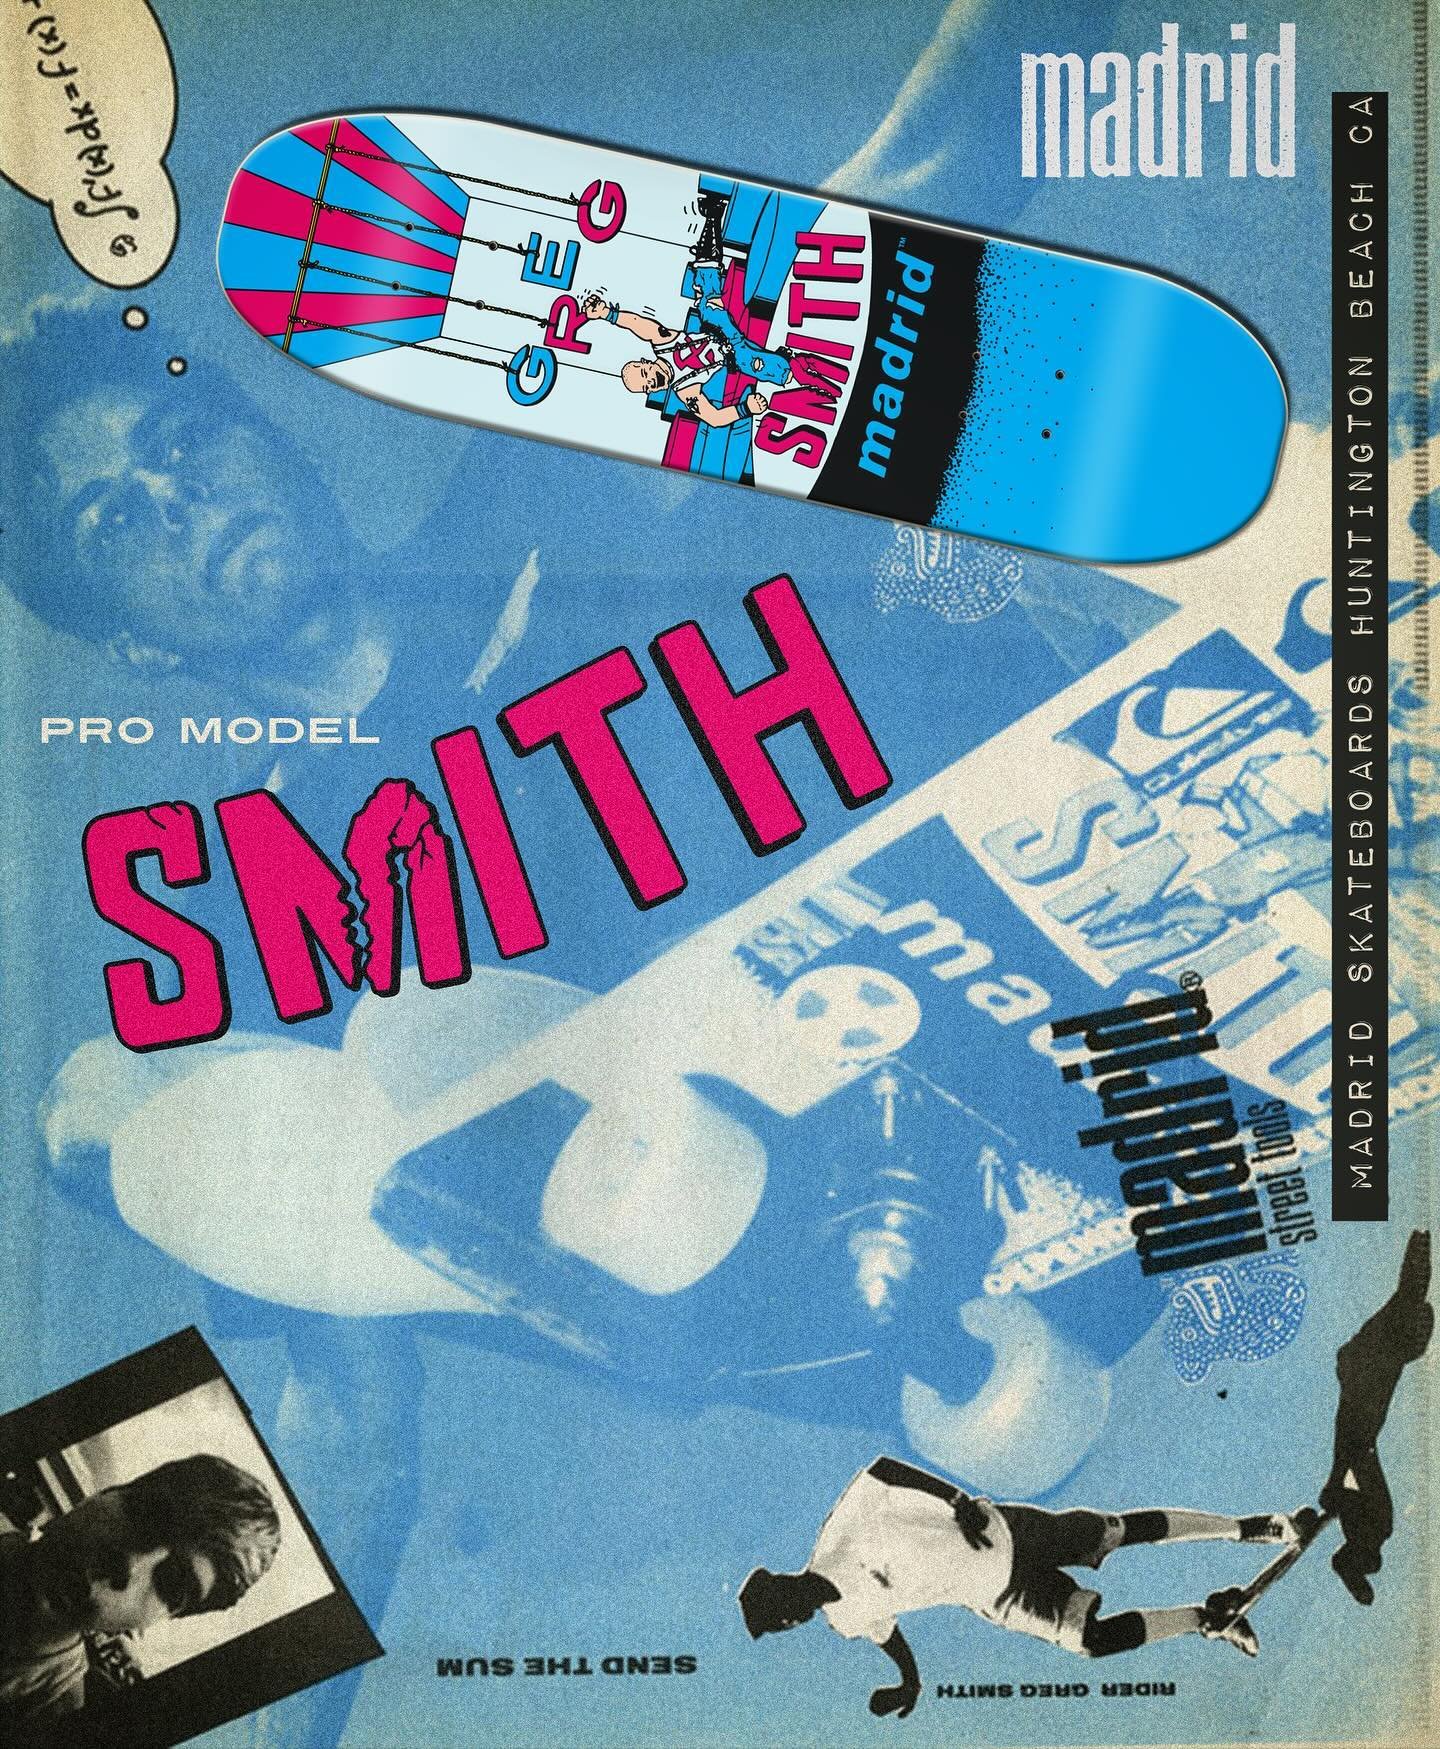 Greg⚡️Smith | Pro Model

Part of our upcoming retro series, focusing on never-before-reissued boards from the Madrid Archives!

Original shapes and concaves, painstakingly recreated graphics, same top quality planks - crafted by human hands right her